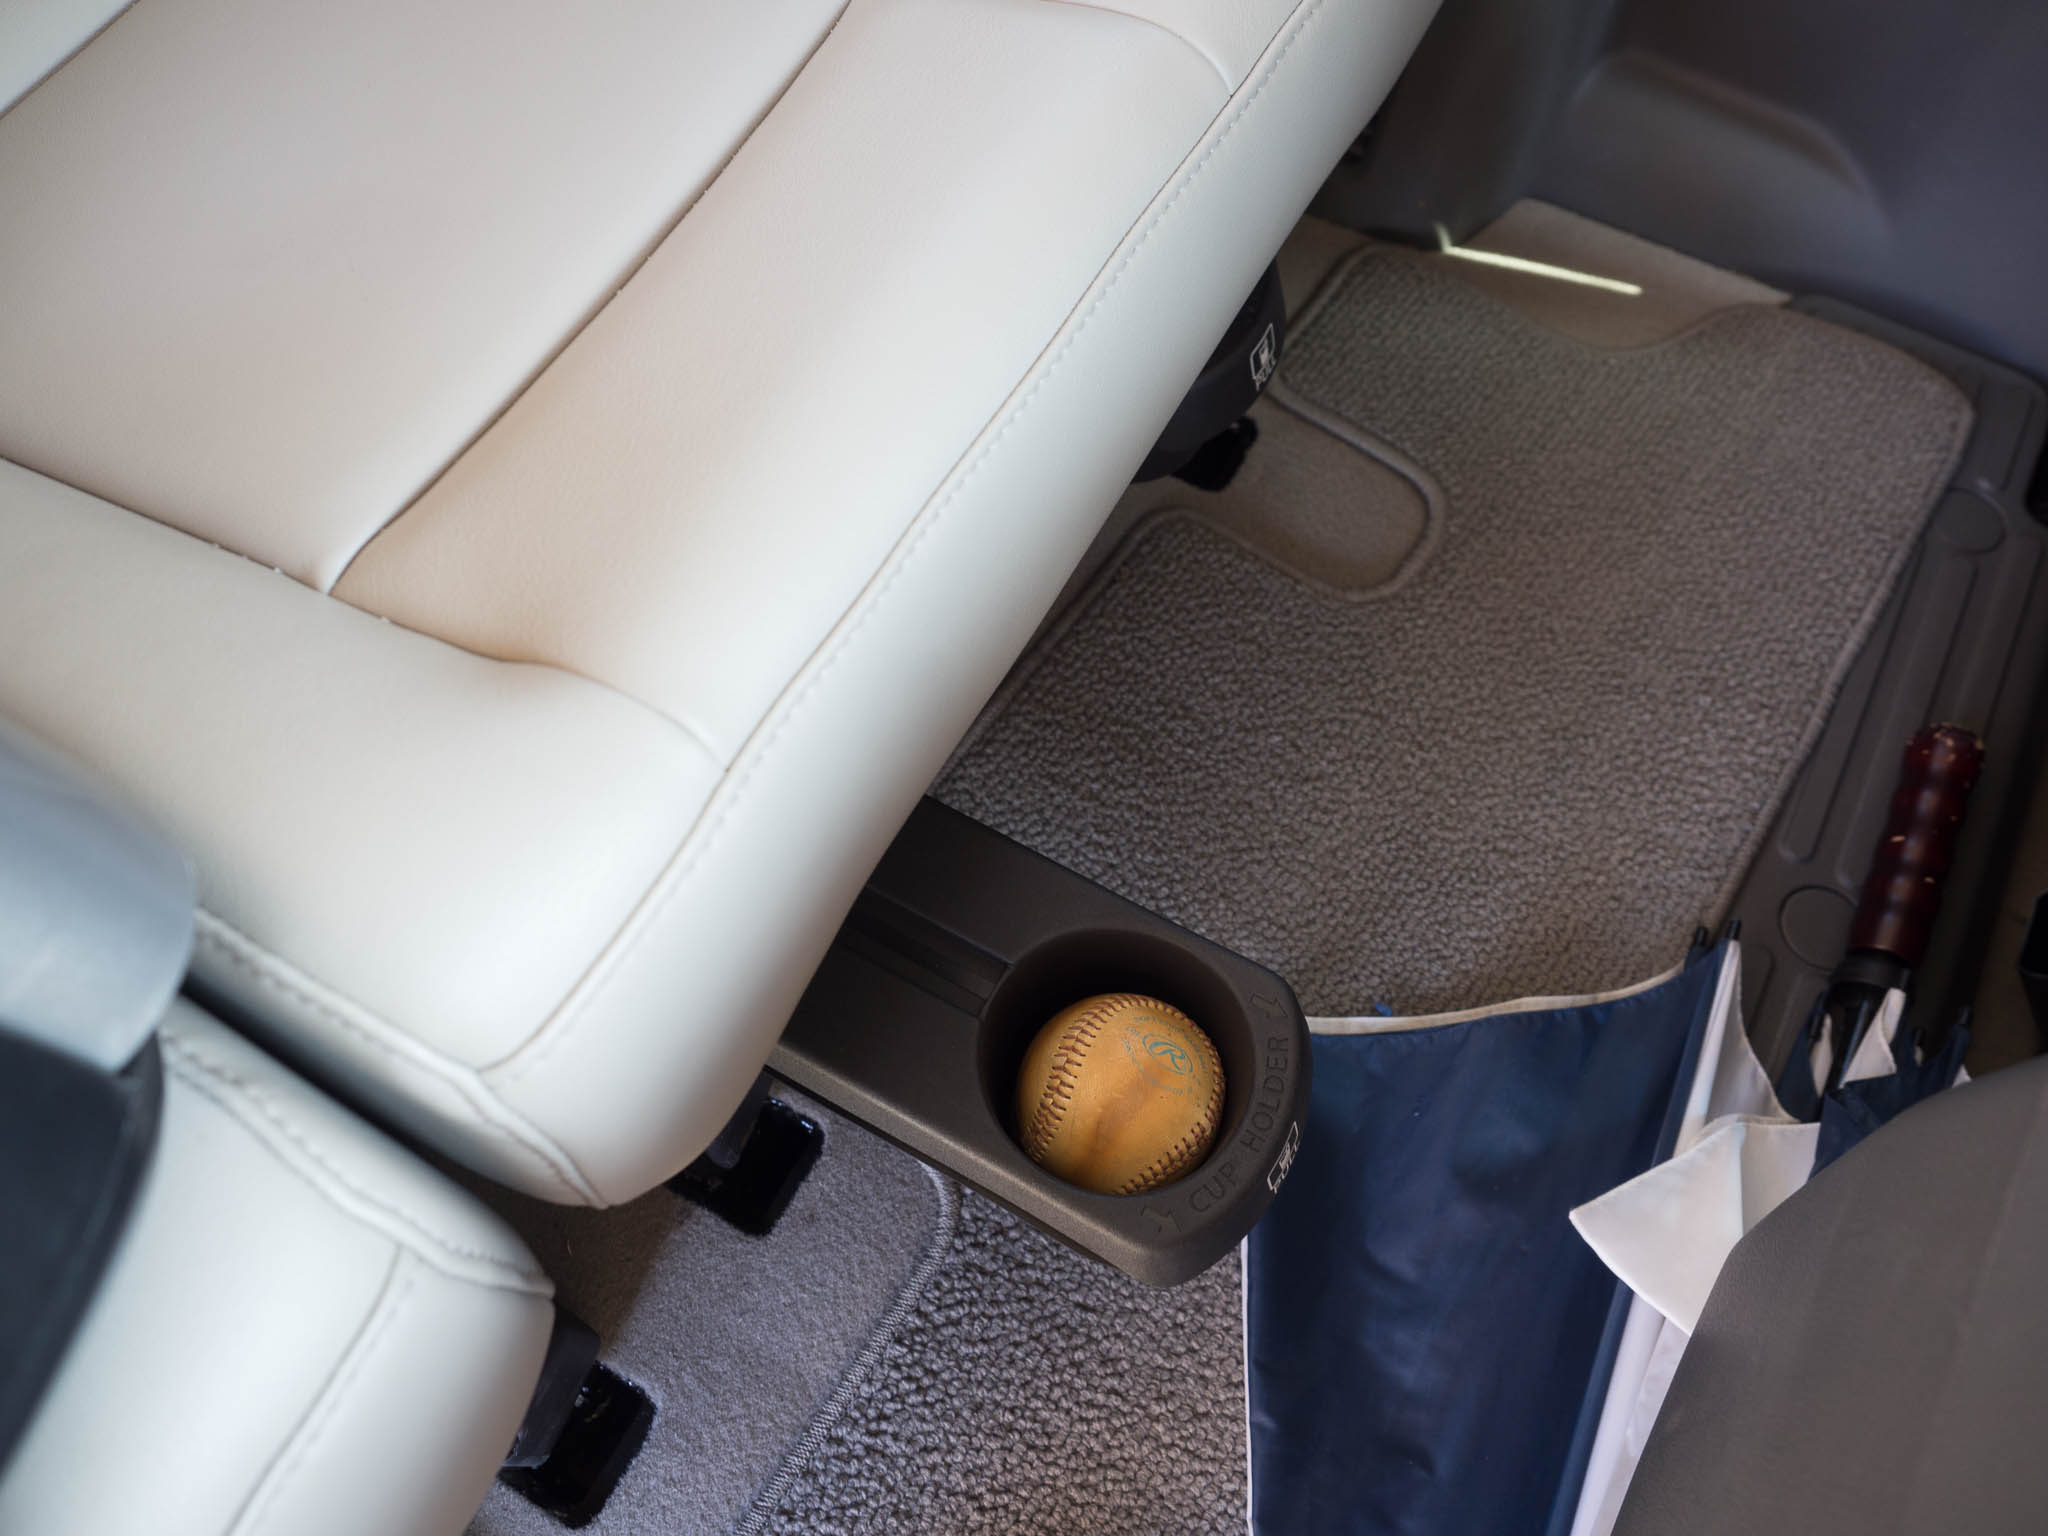 Seat mounted cupholders are perfect for holding beverages, or ... baseballs.